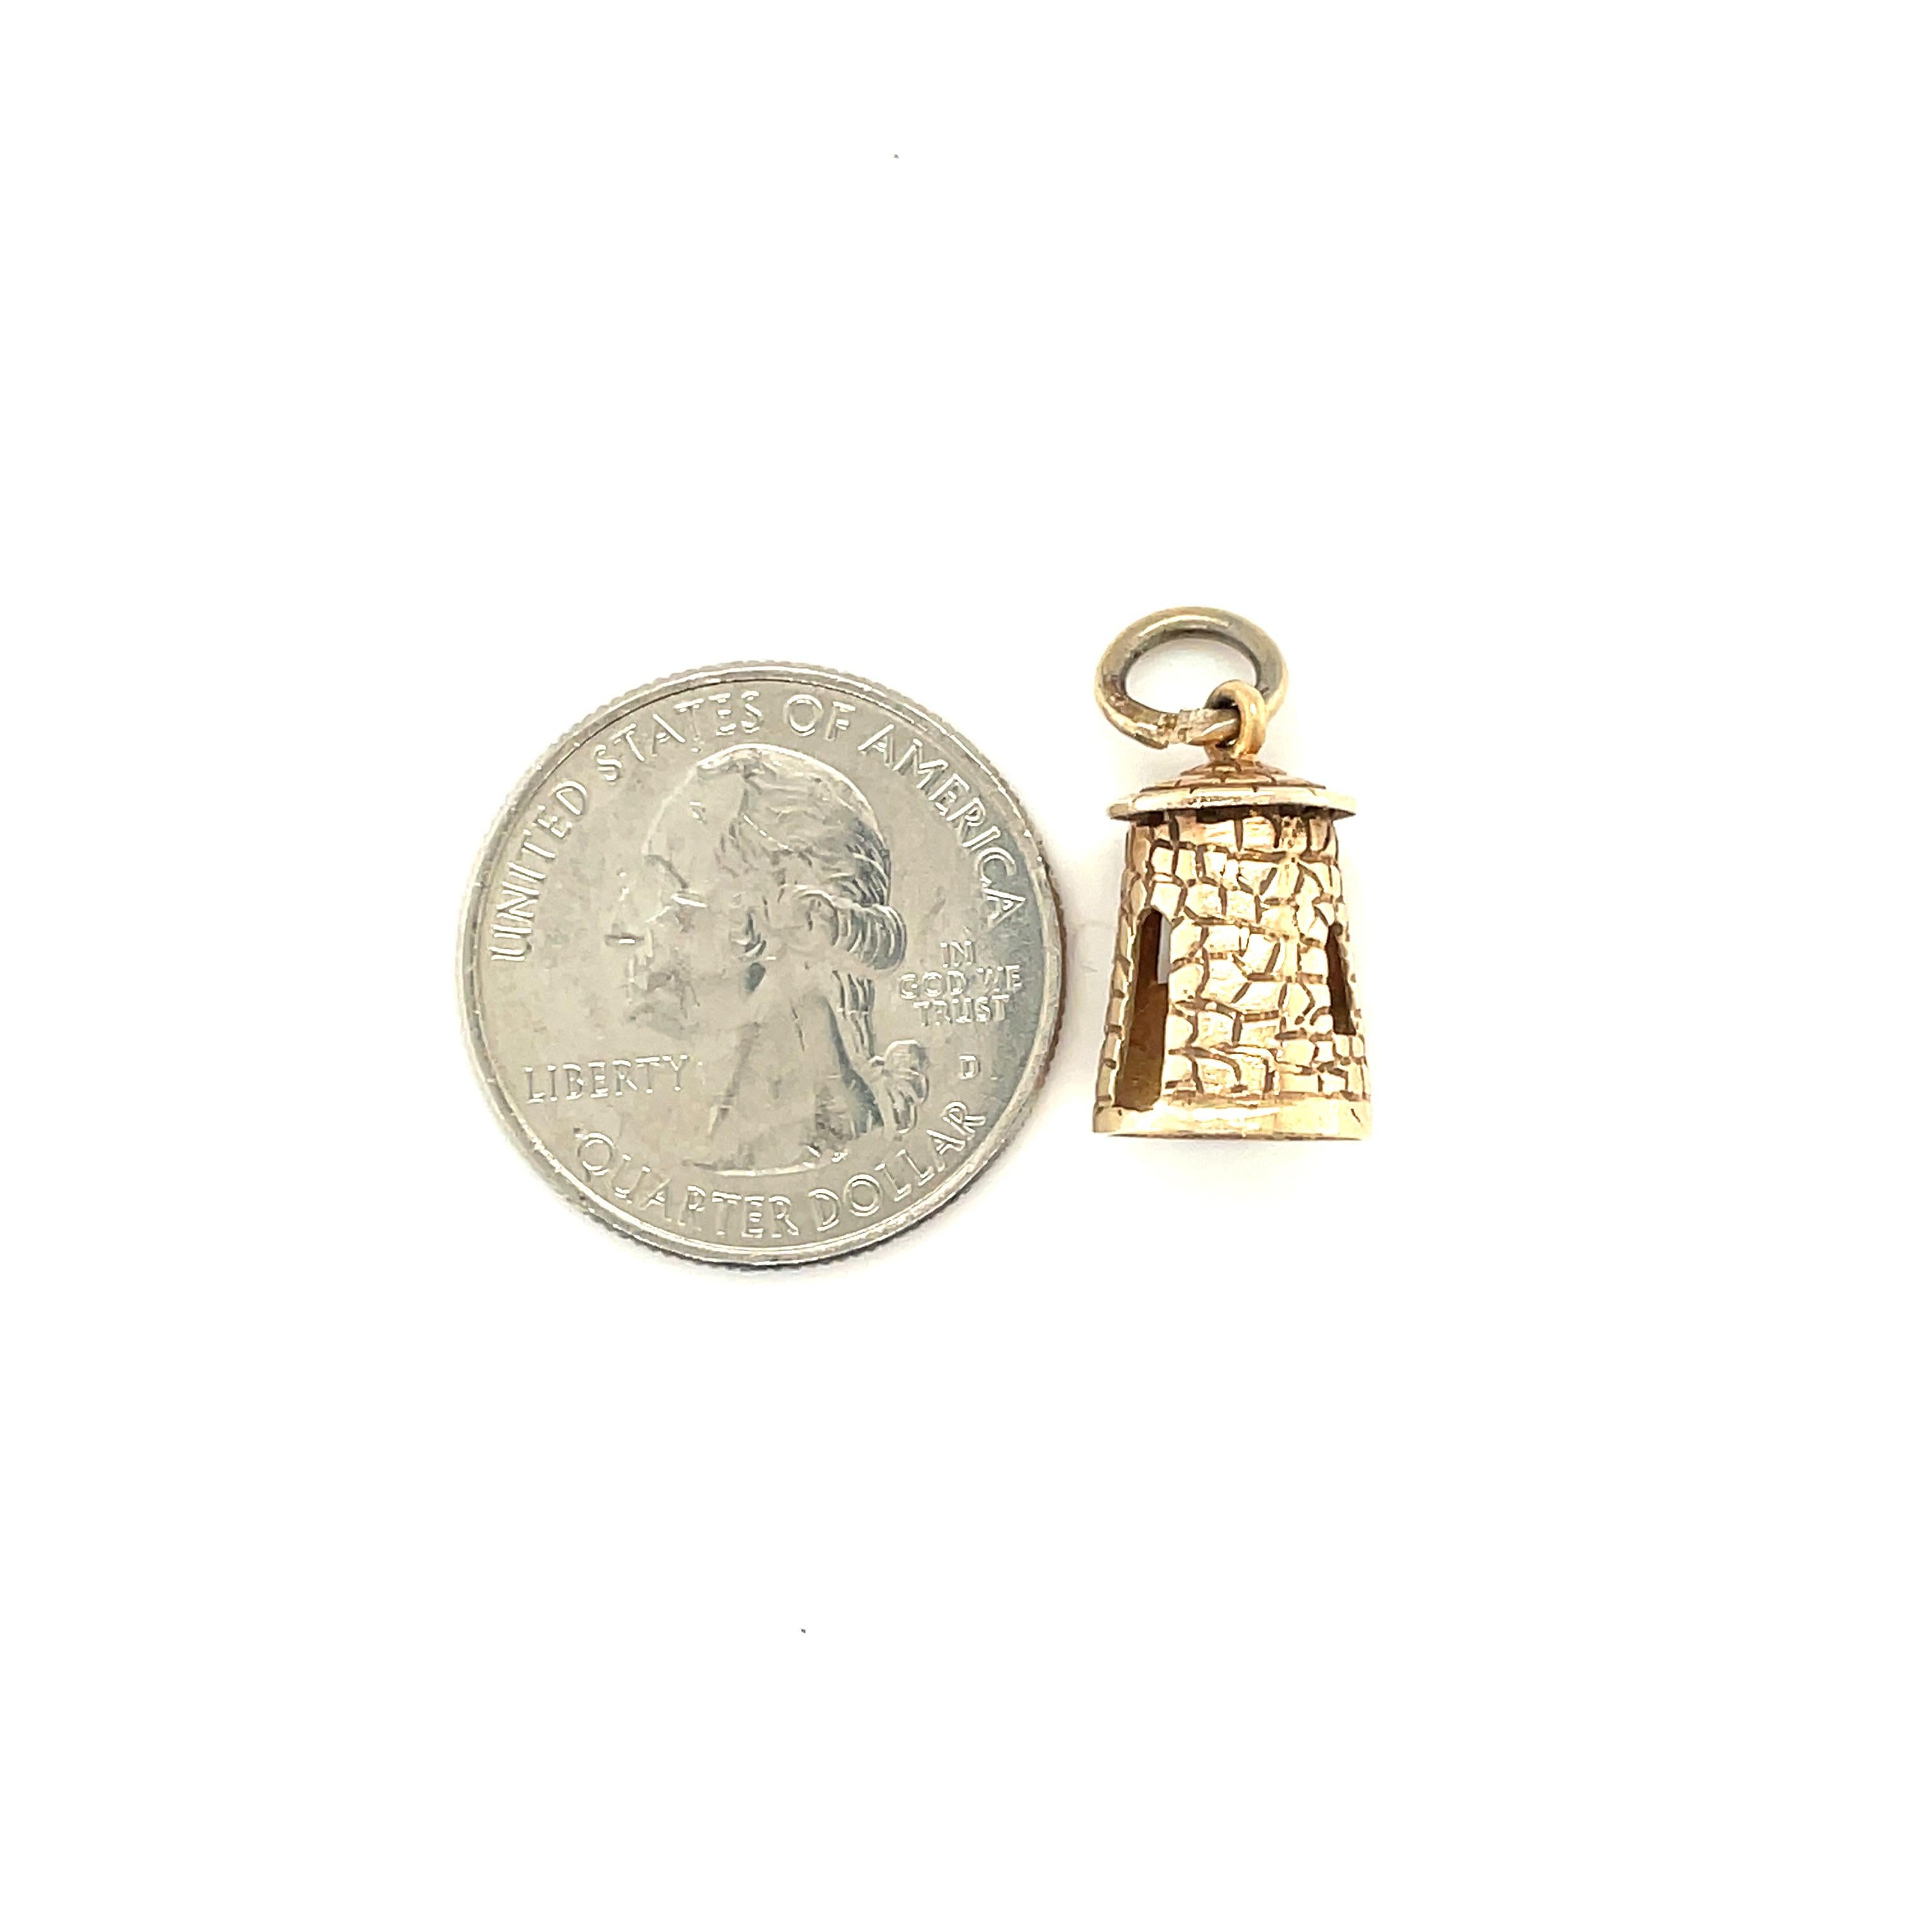 10K Yellow Gold Tower Charm

Grams 2.8